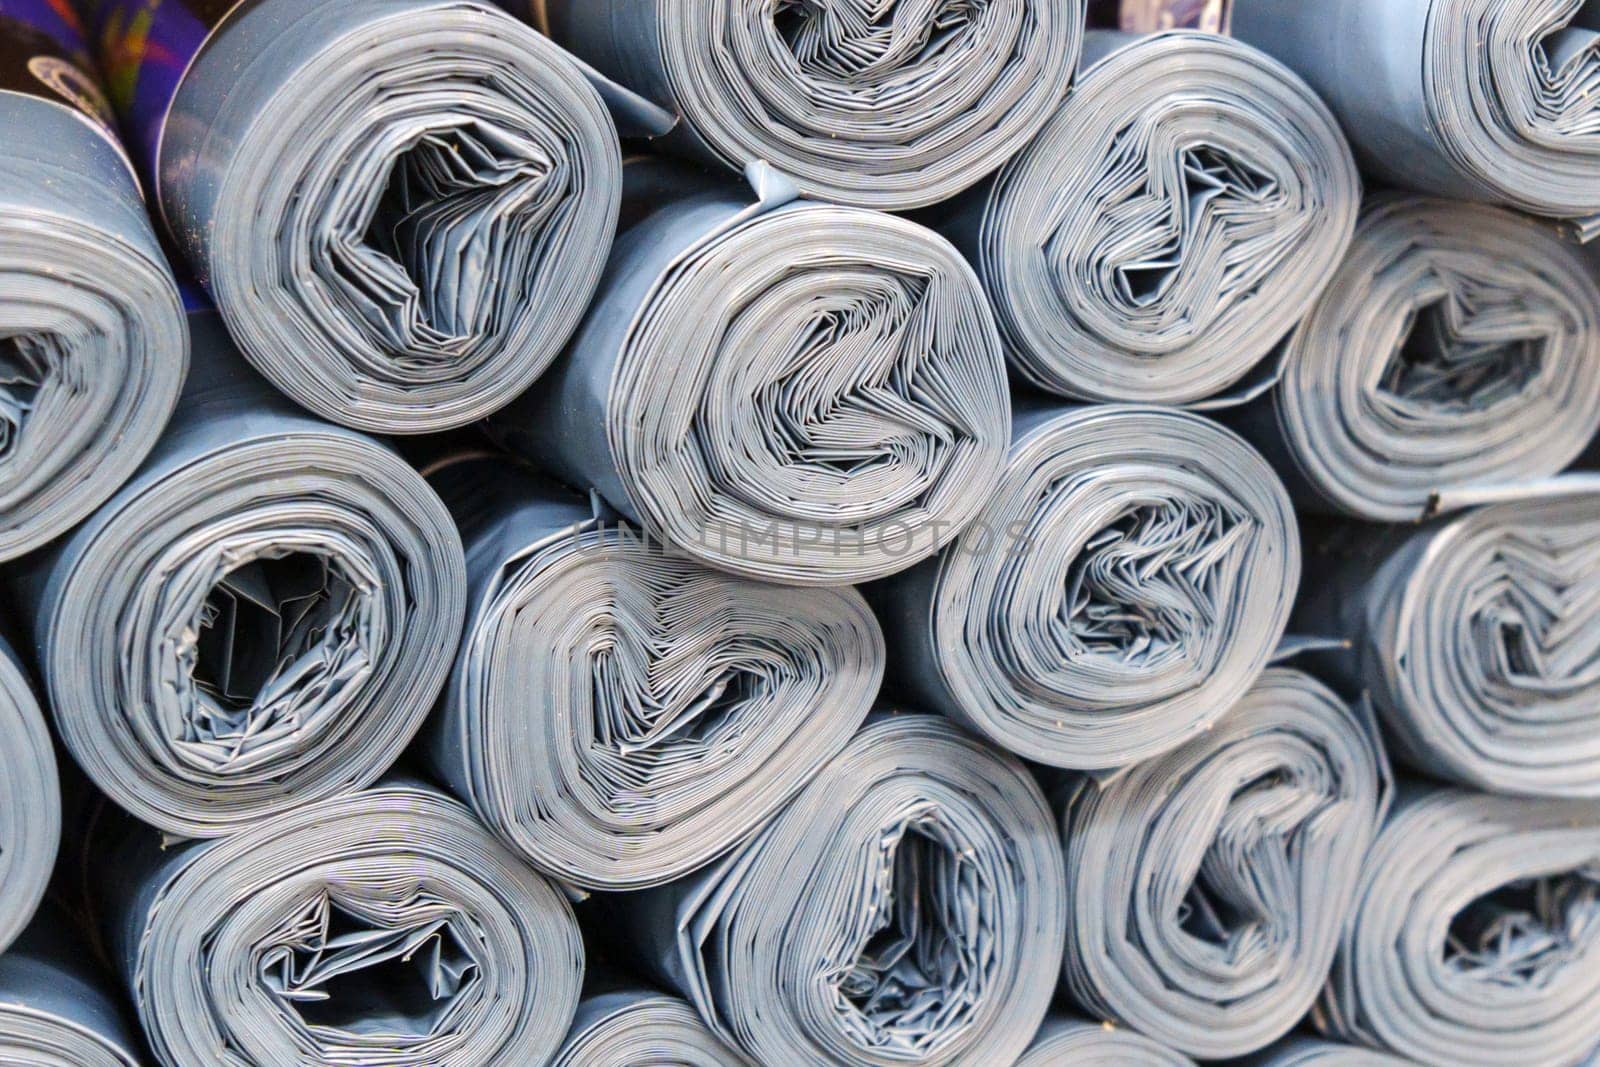 Gray Plastic rolls stacked in a disorderly manner, creating a sound of roller paper